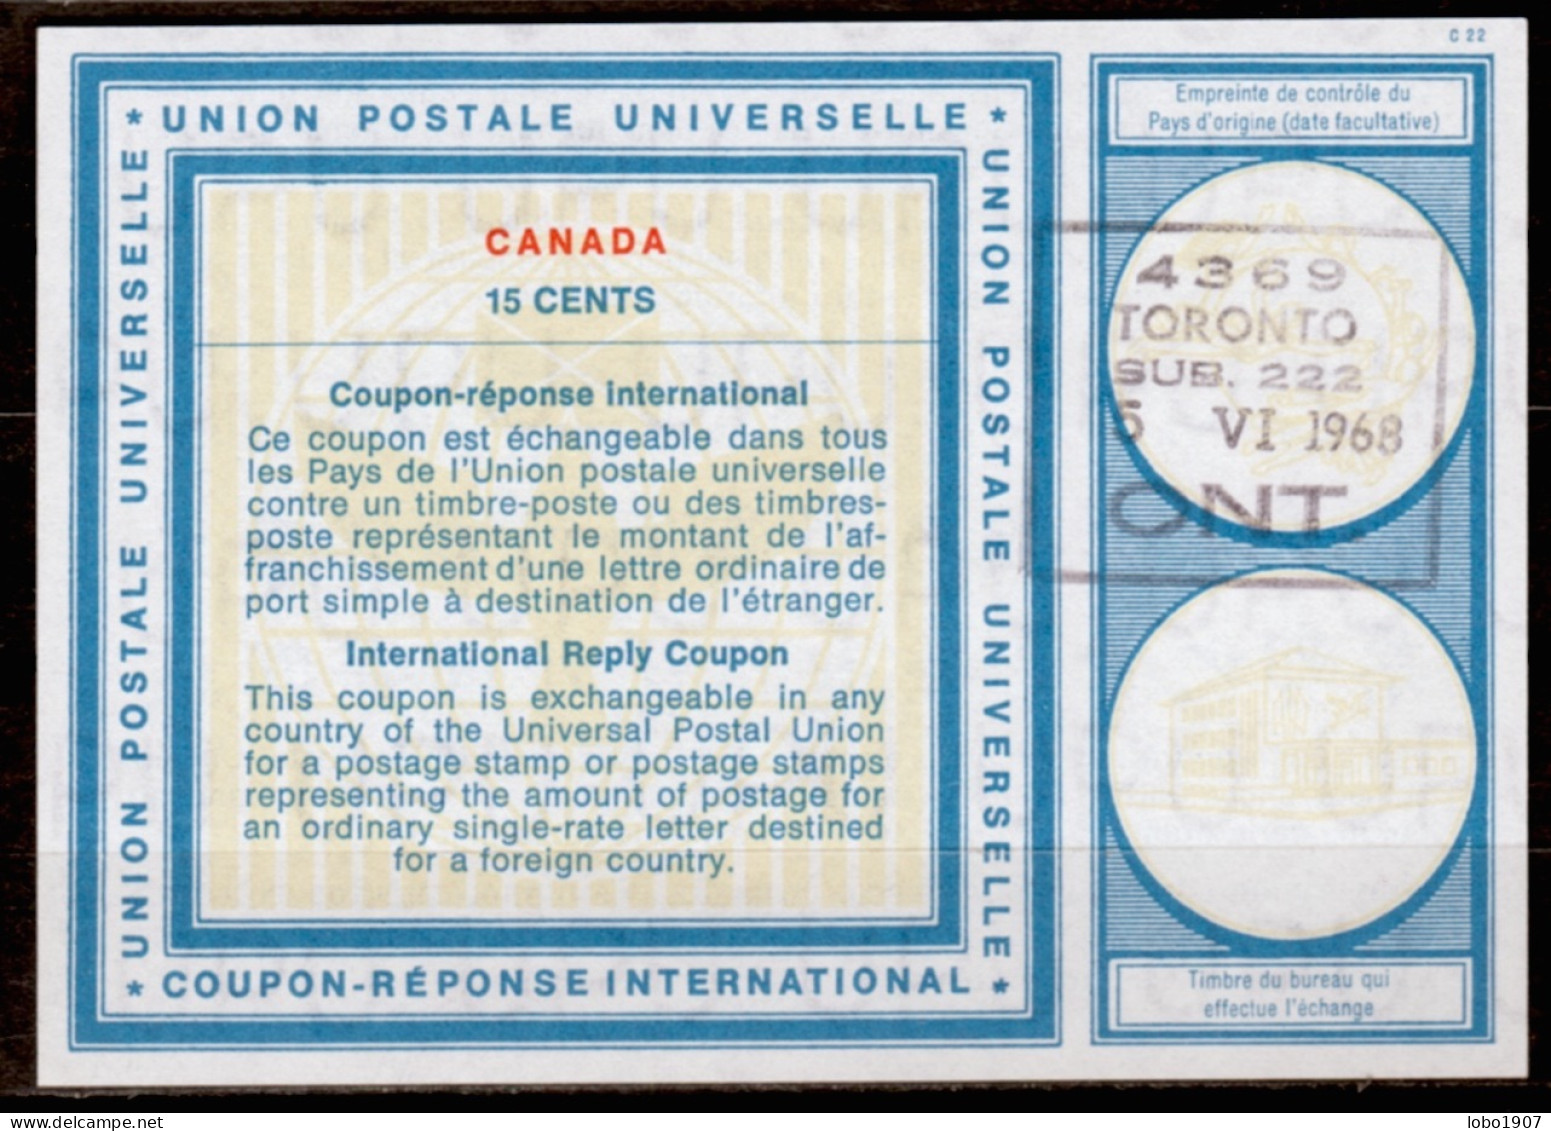 CANADA 1907-2007  Collection of 39 International, Imperial and Commonwealth Reply Coupon Reponse Antwortschein  IRC IAS